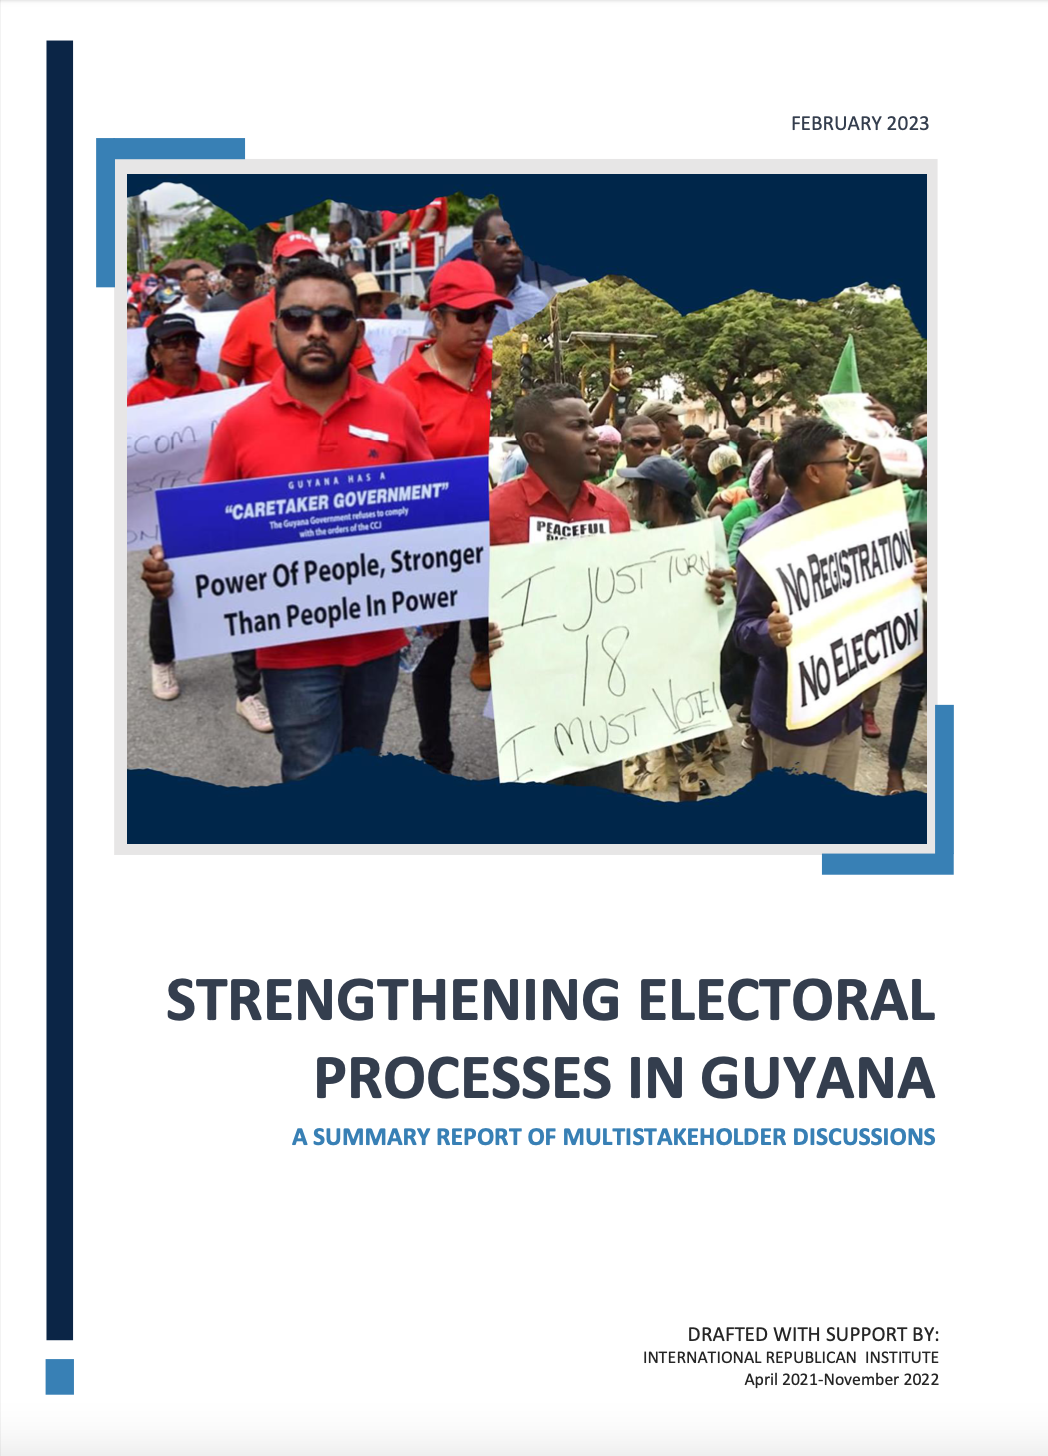 Discussions Towards Strengthening Electoral Processes in Guyana